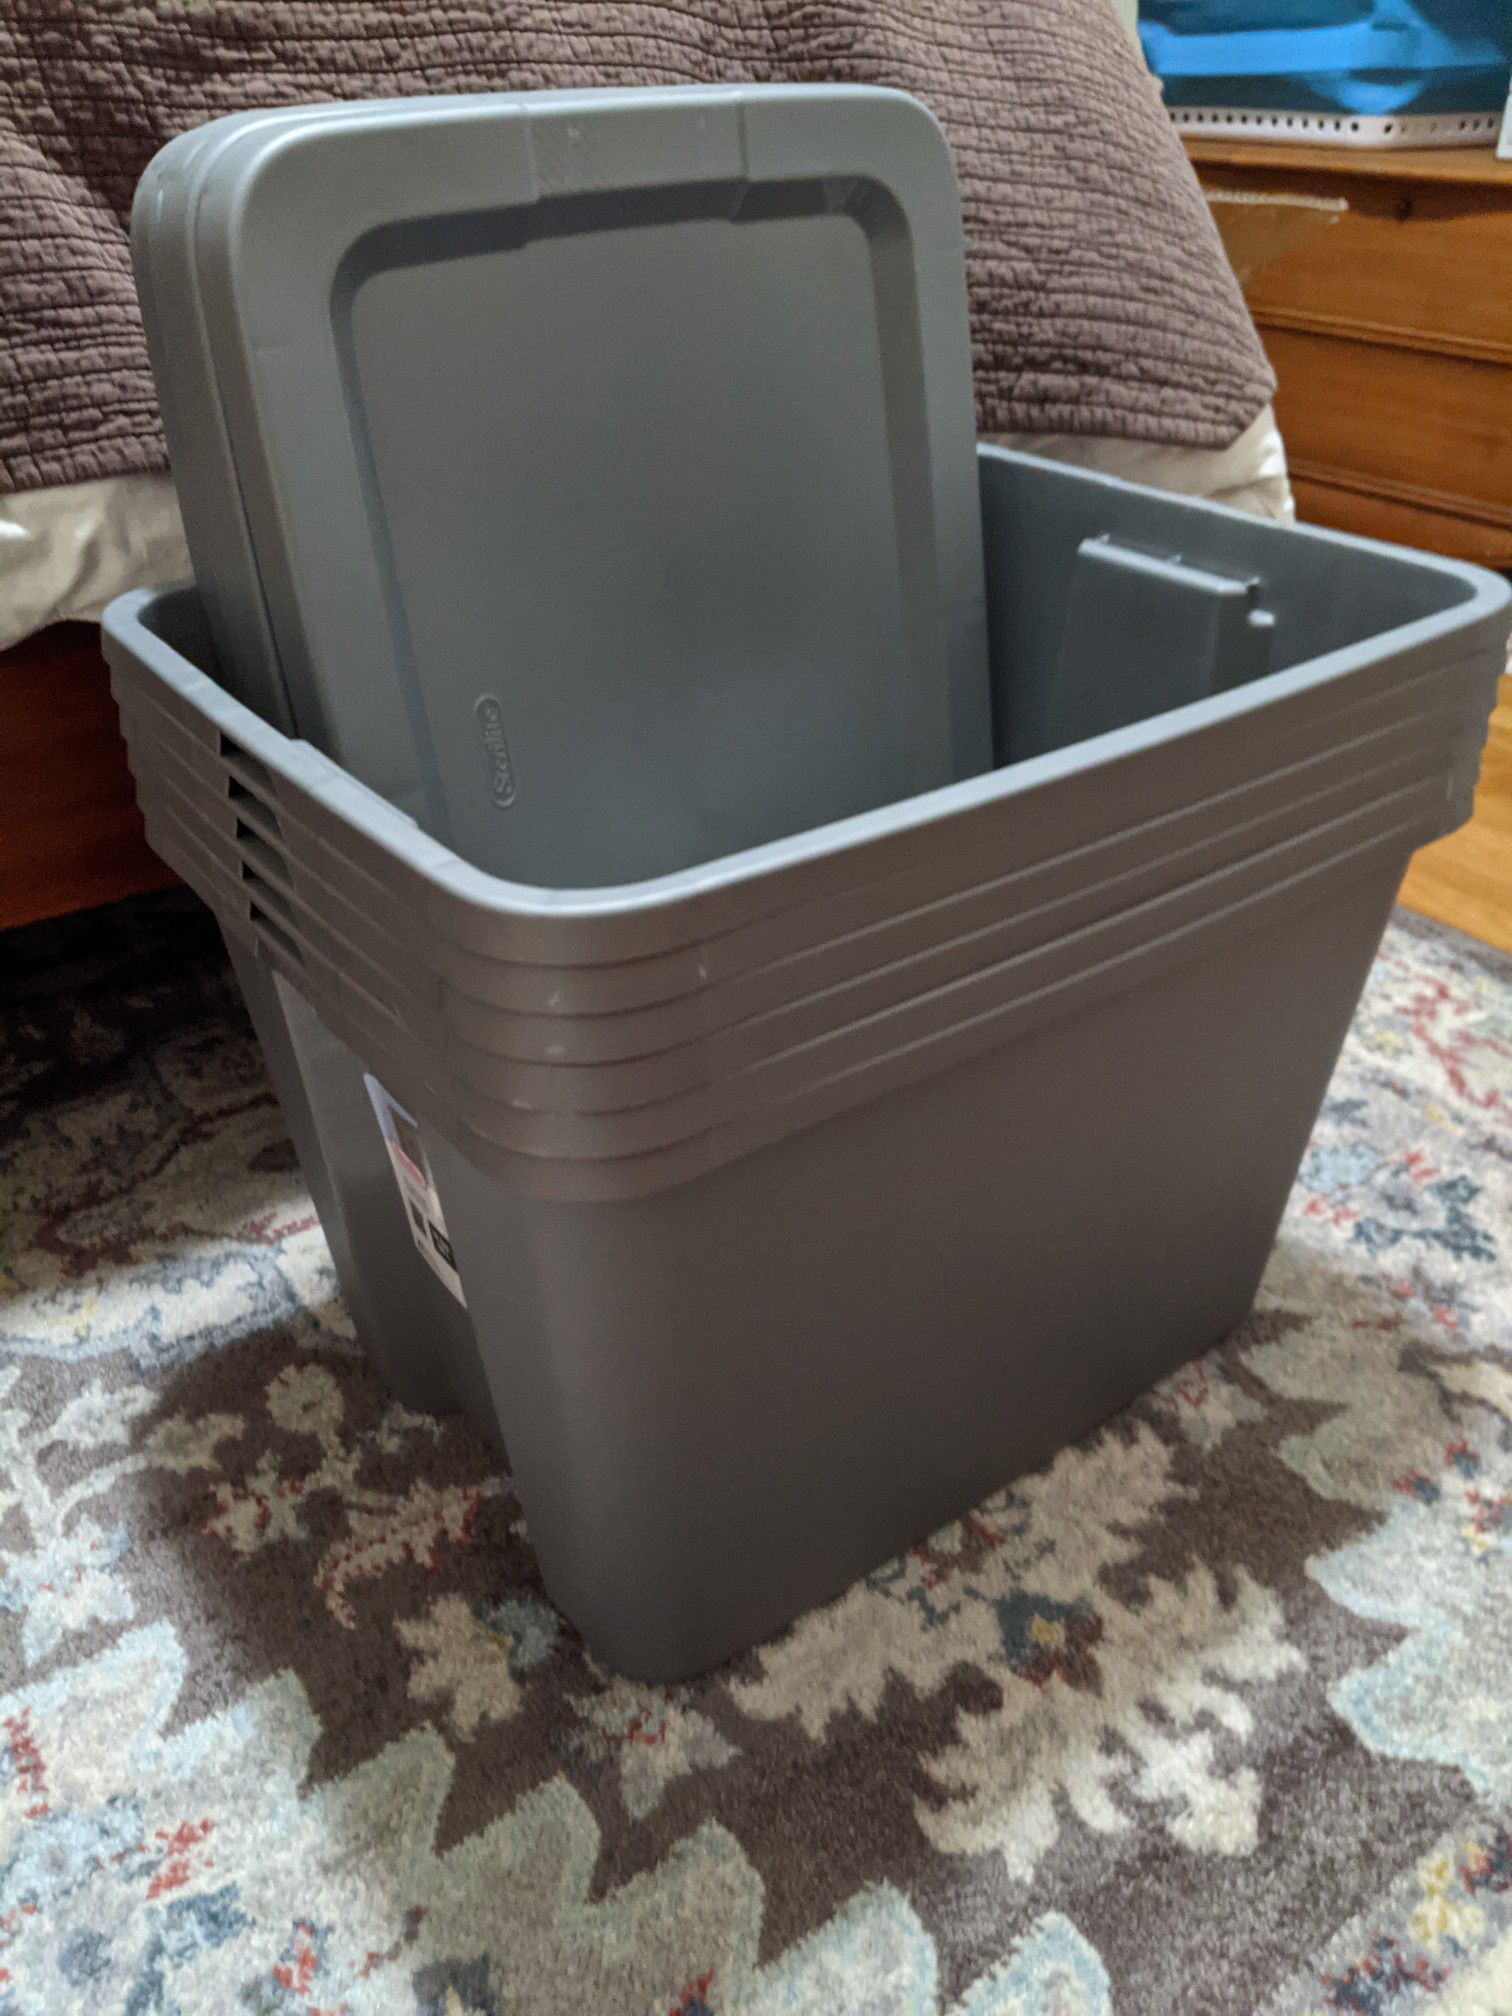 5 tubs with lids - 18 gallon size. Like new!